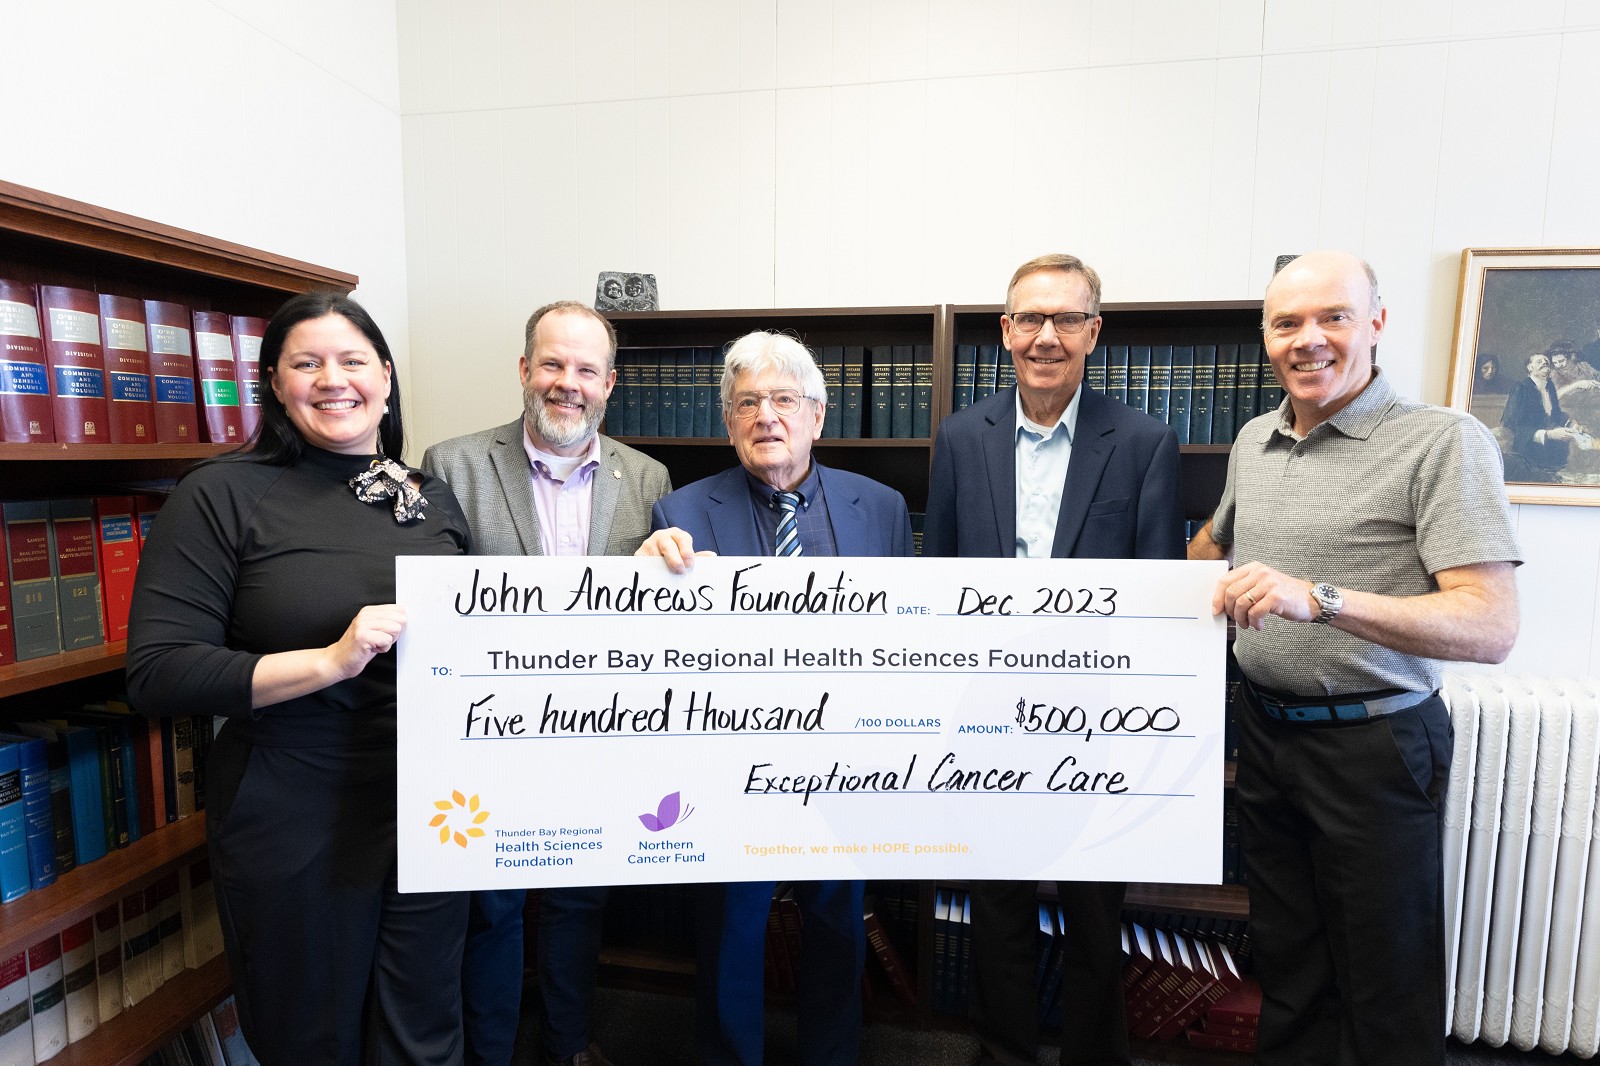 John Andrews Foundation Donation Making a Real Difference in the Lives of Local Cancer Patients